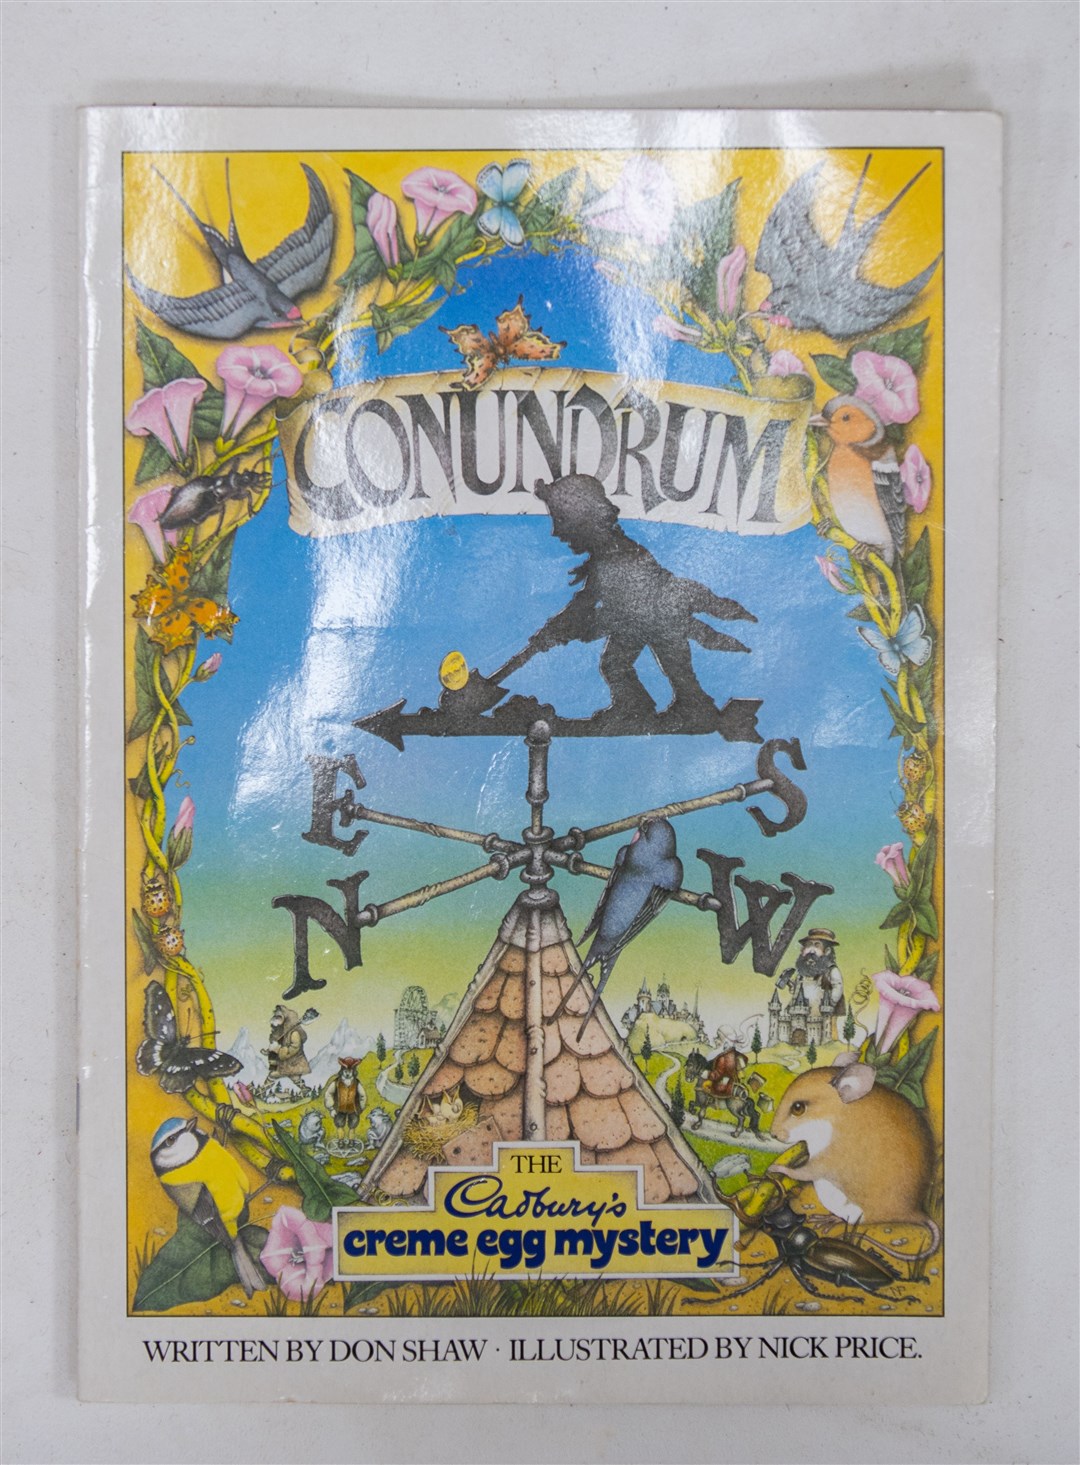 The egg was based on the front cover of the Cadbury’s Conundrum clue book (Joe Giddens/PA)